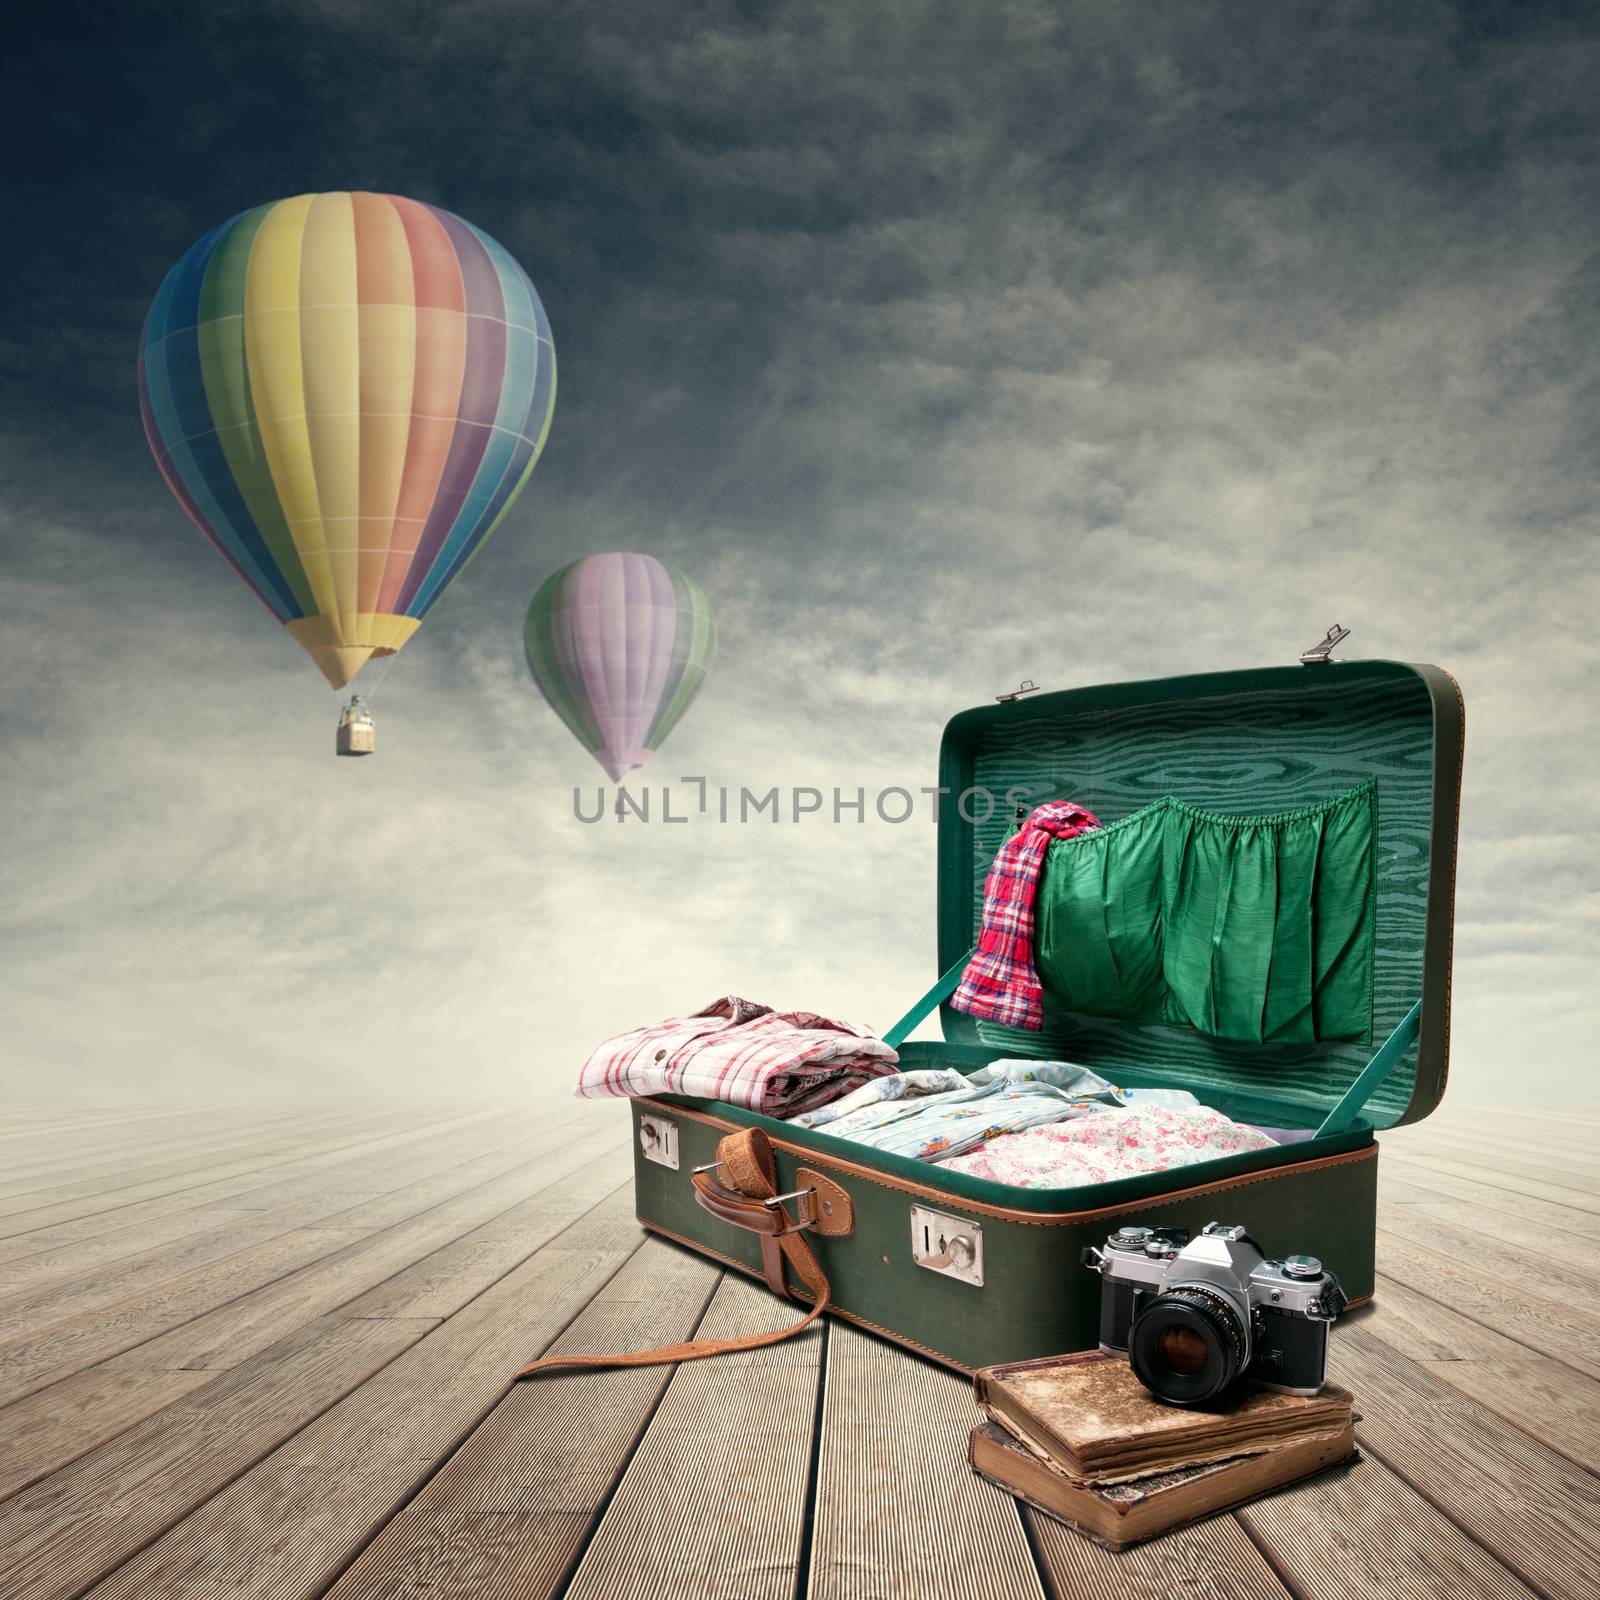 Vintage suitcase with old books and camera, hot air balloons flying on background.